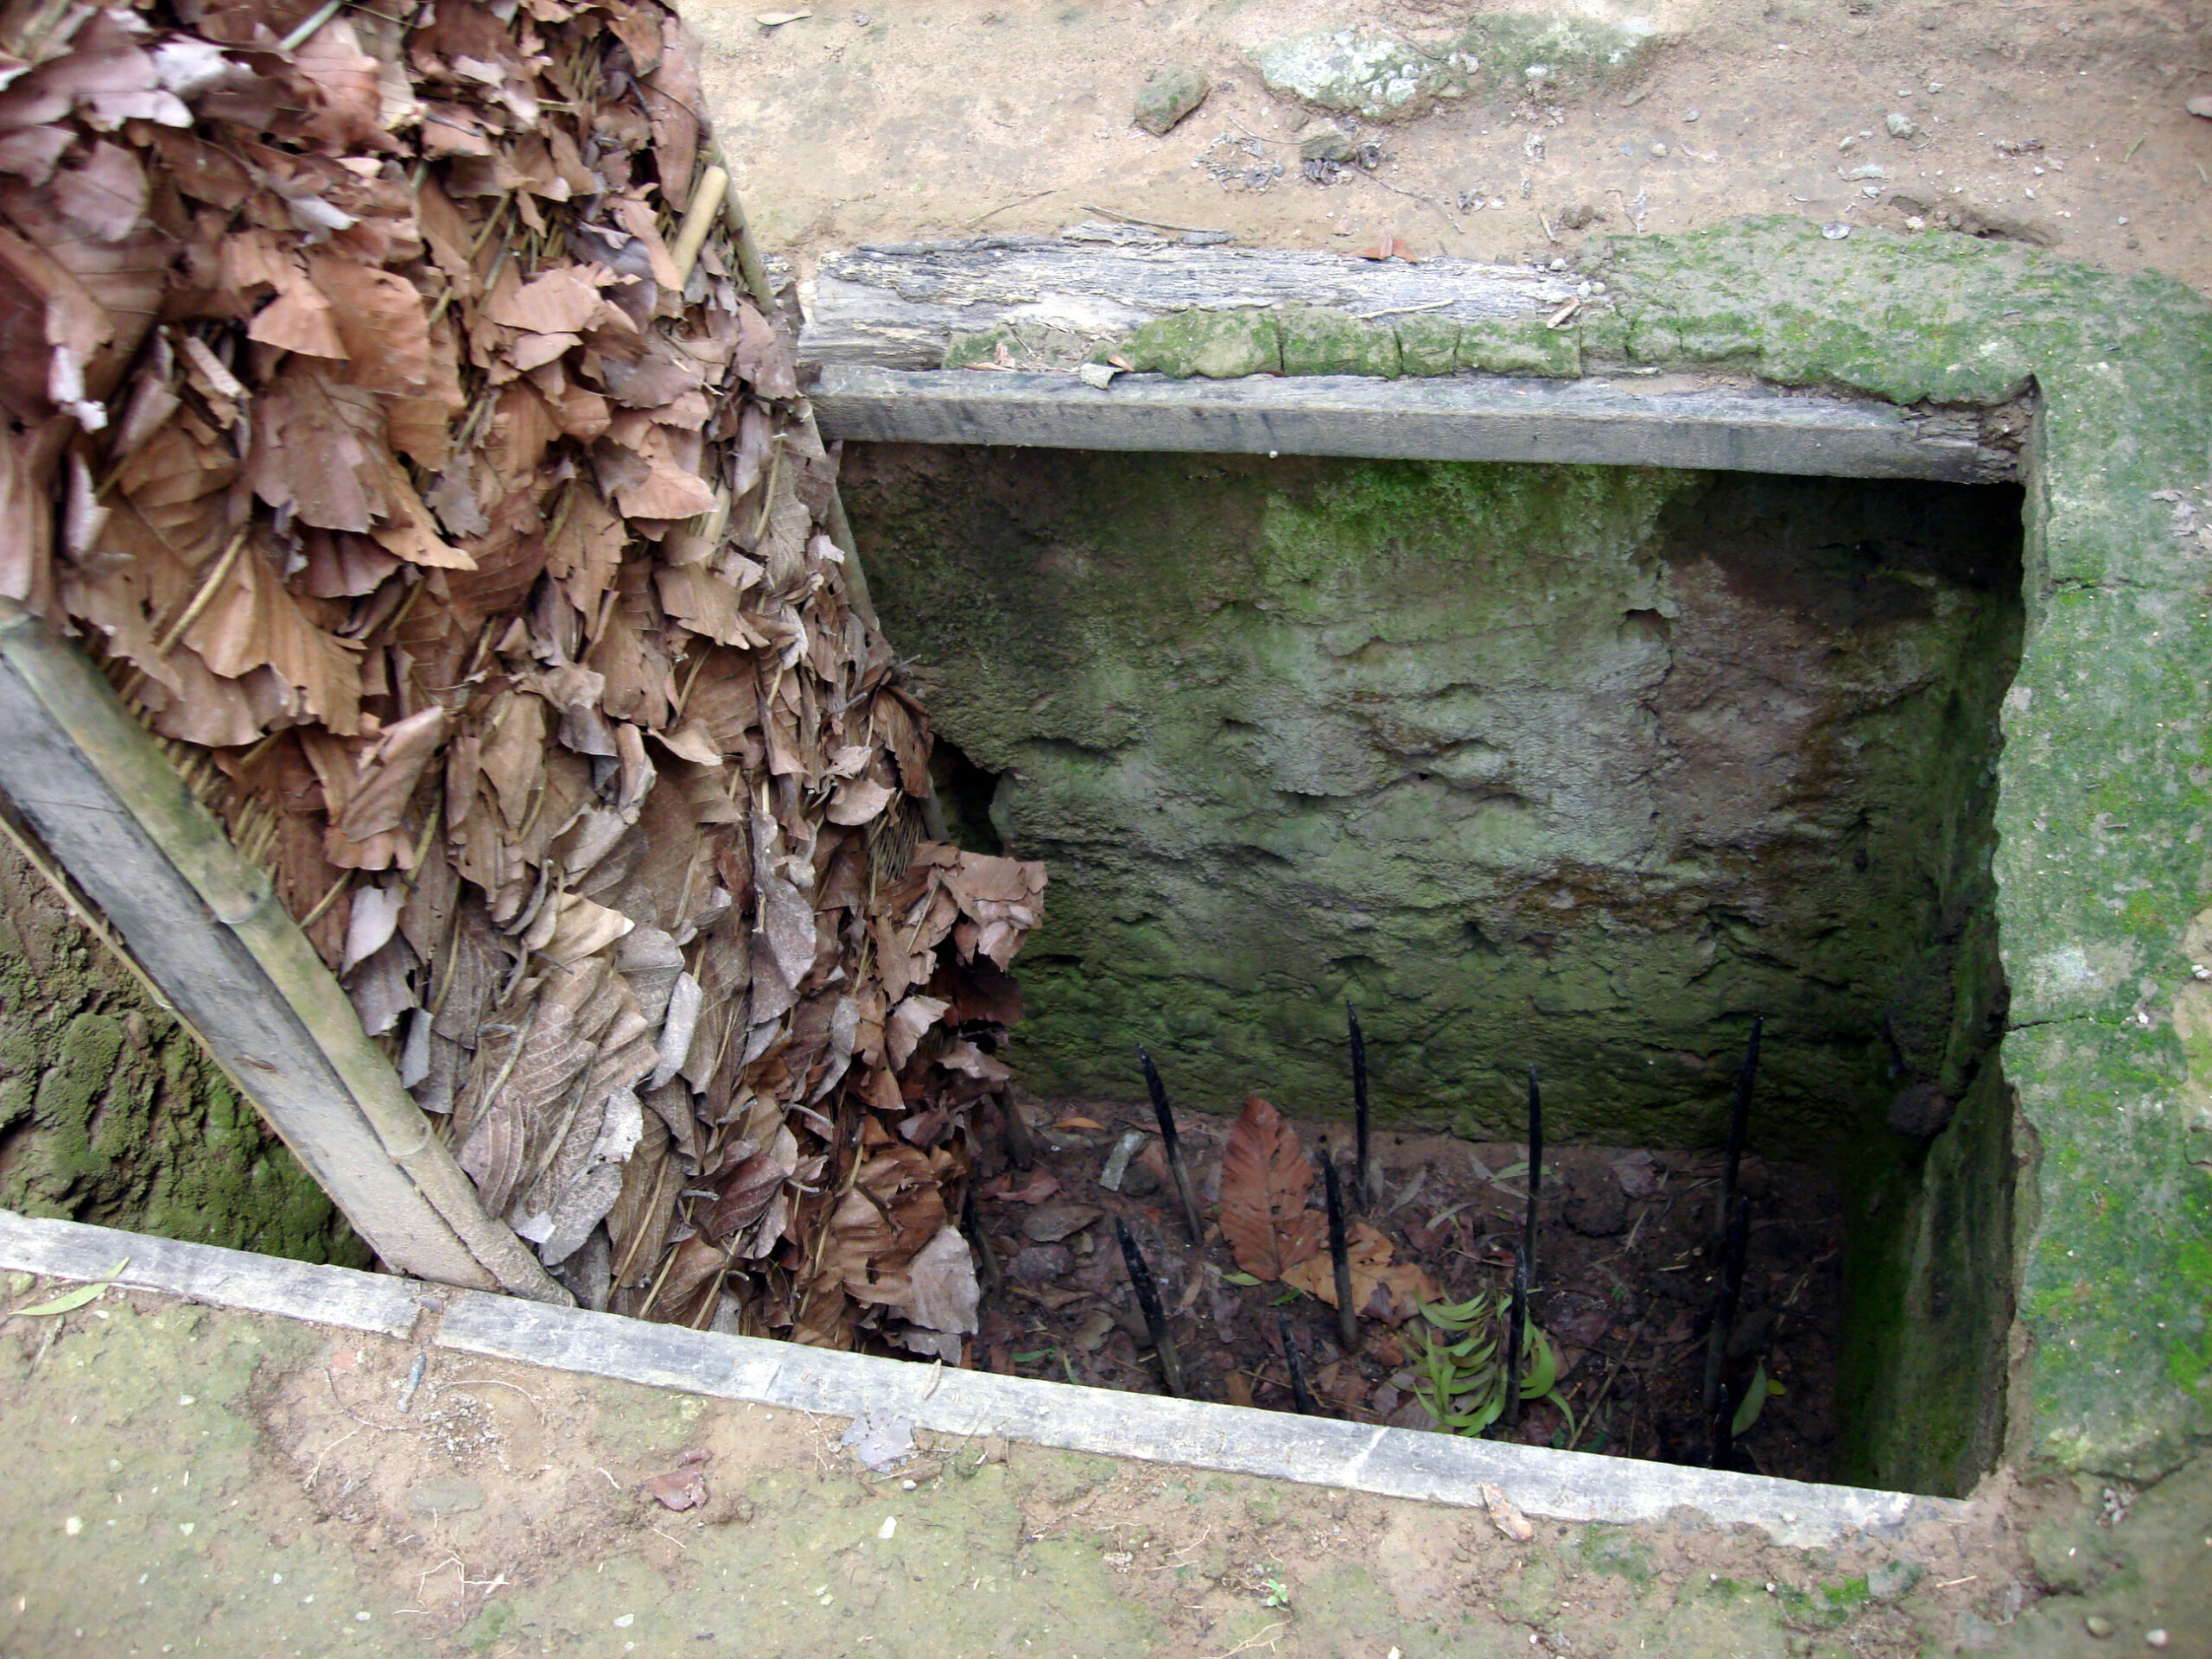 https://www.wearethemighty.com/uploads/2021/07/Lascar_A_booby_trap_with_bamboo_spikes_-_Cu_Chi_tunnels_4607992038-1-scaled.jpeg?auto=webp